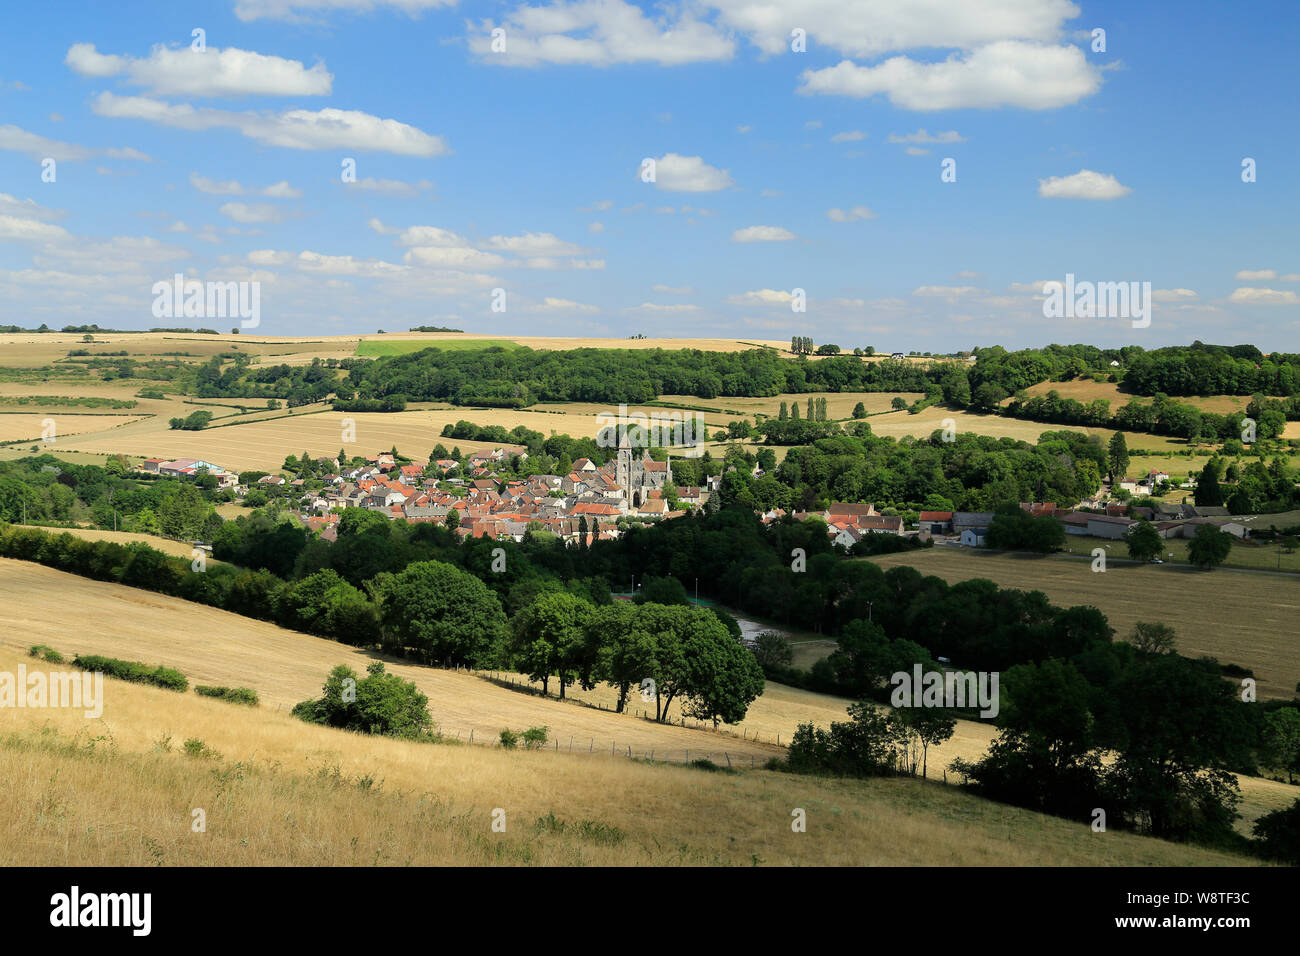 French country village of St. Etienne l'Abbaye surrounded by wheatfields. Stock Photo